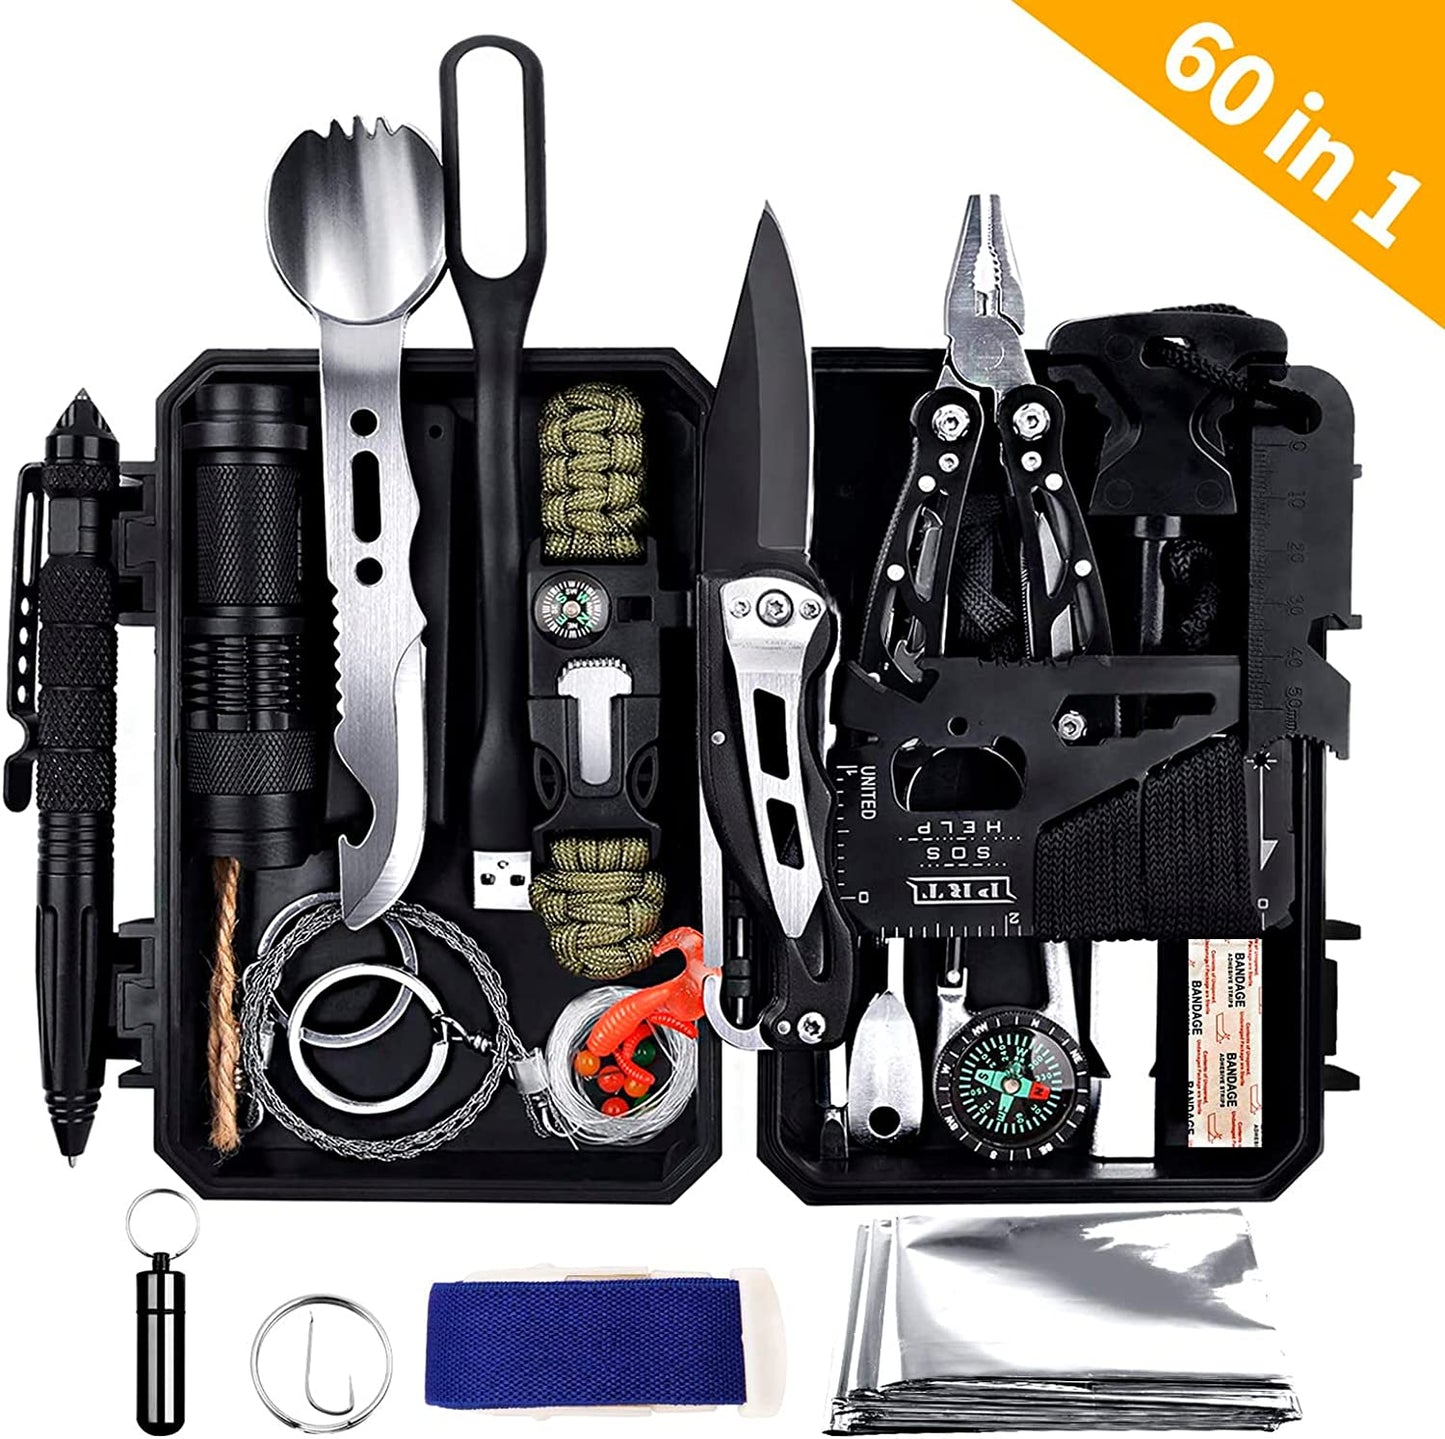 Comprehensive 60-in-1 Emergency Survival Gear Kit with Bracelet, Whistle, Flashlight, Pliers, Pen, and Wire Saw - Ideal for Camping, and Car Emergencies